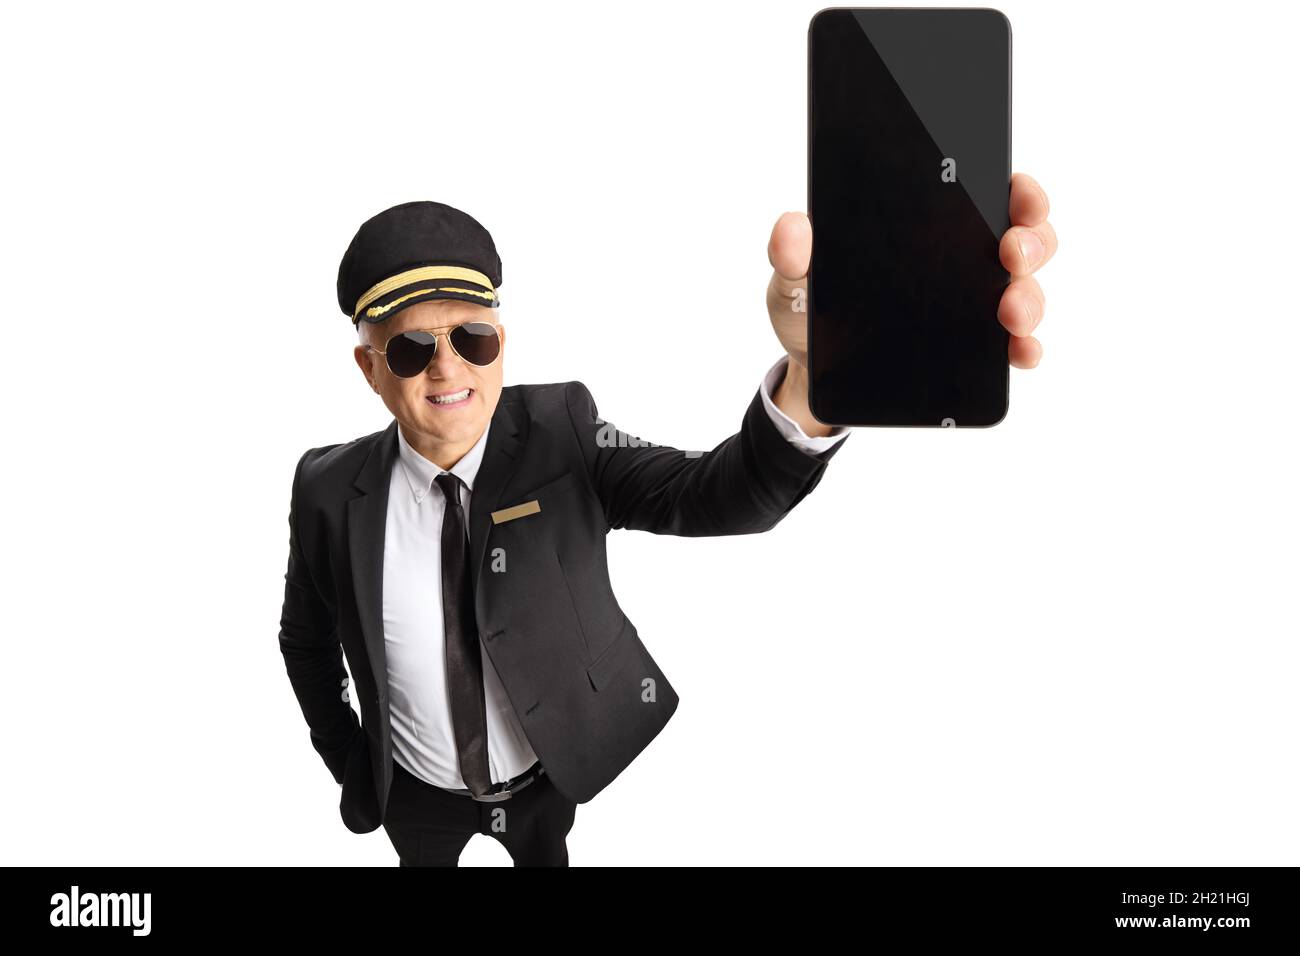 Mature chauffeur showing a smartphone in front of camera isolated on white background Stock Photo